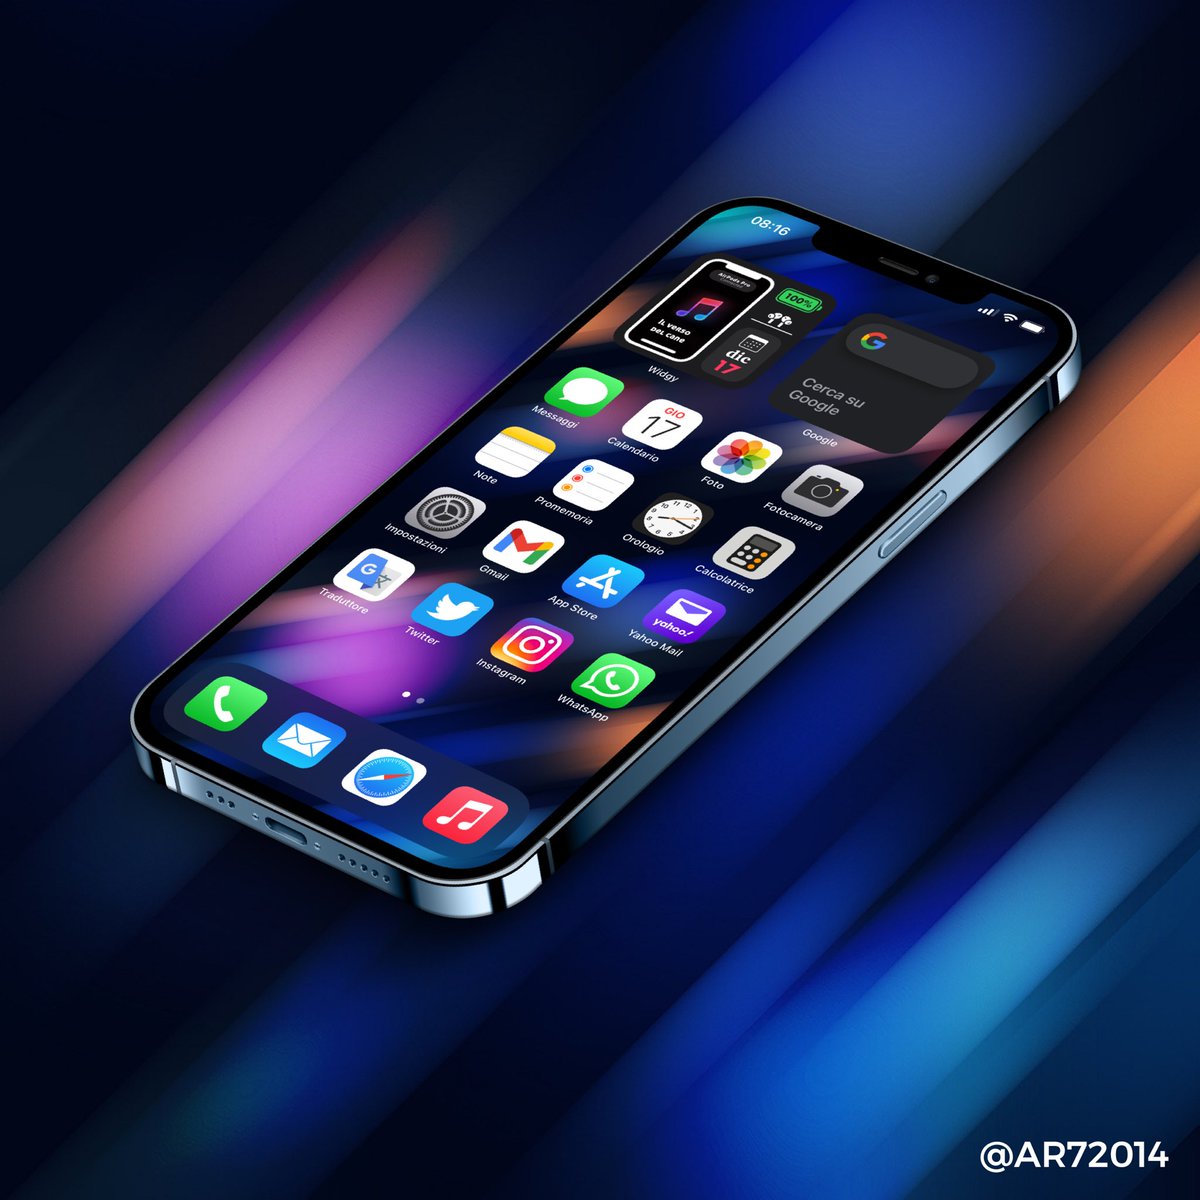 Ar7 Iphone Ipadair Screenshot Maker Pro App By Screenshot Pro Is Updated By Introducing Iphone12 Series 3d Mockups Ipad Air 4 And More Download On Appstore T Co Tewhszdurb Wallpaper Used Pack 9